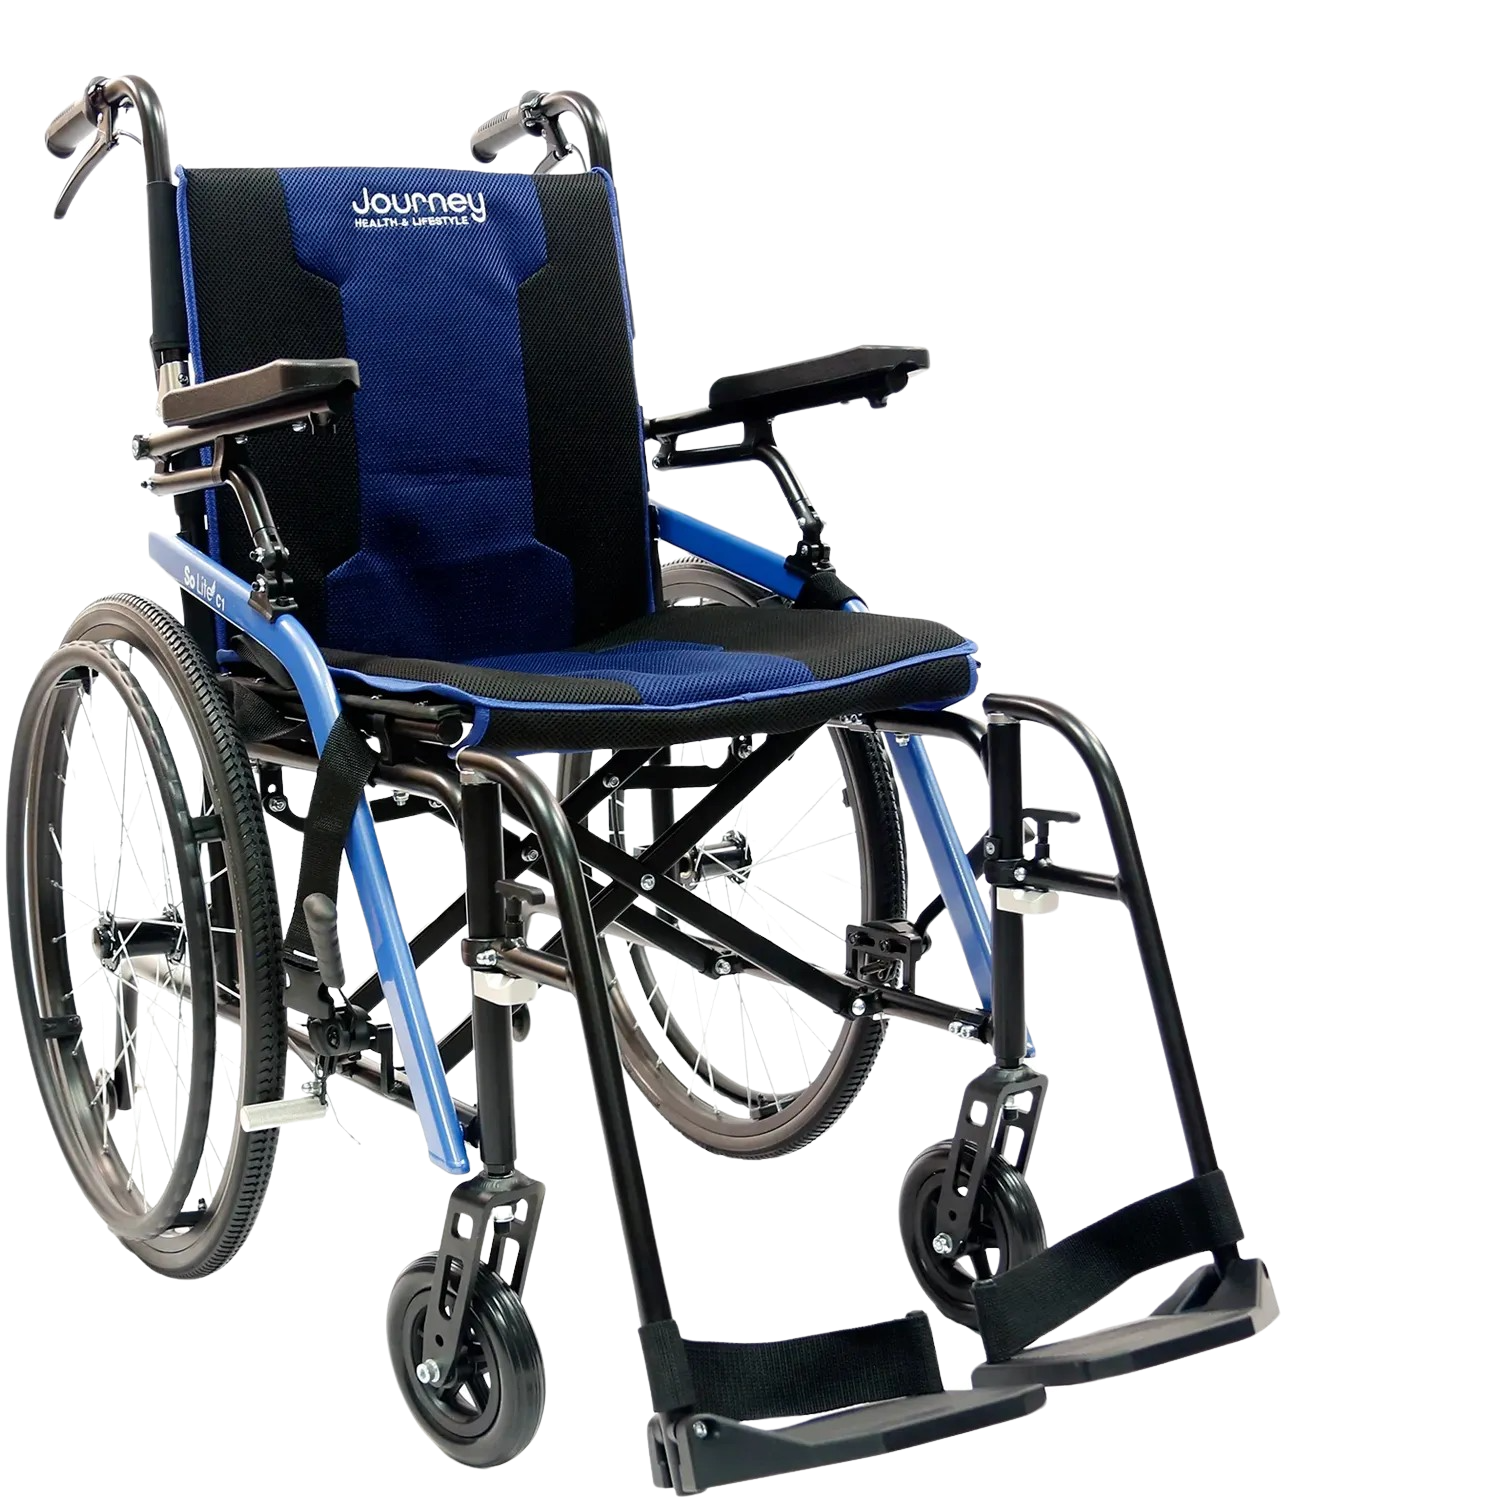 Journey, Journey So Lite Folding Wheelchair Super Lightweight with Padded Seat and Dual Hand Brakes 08480 New